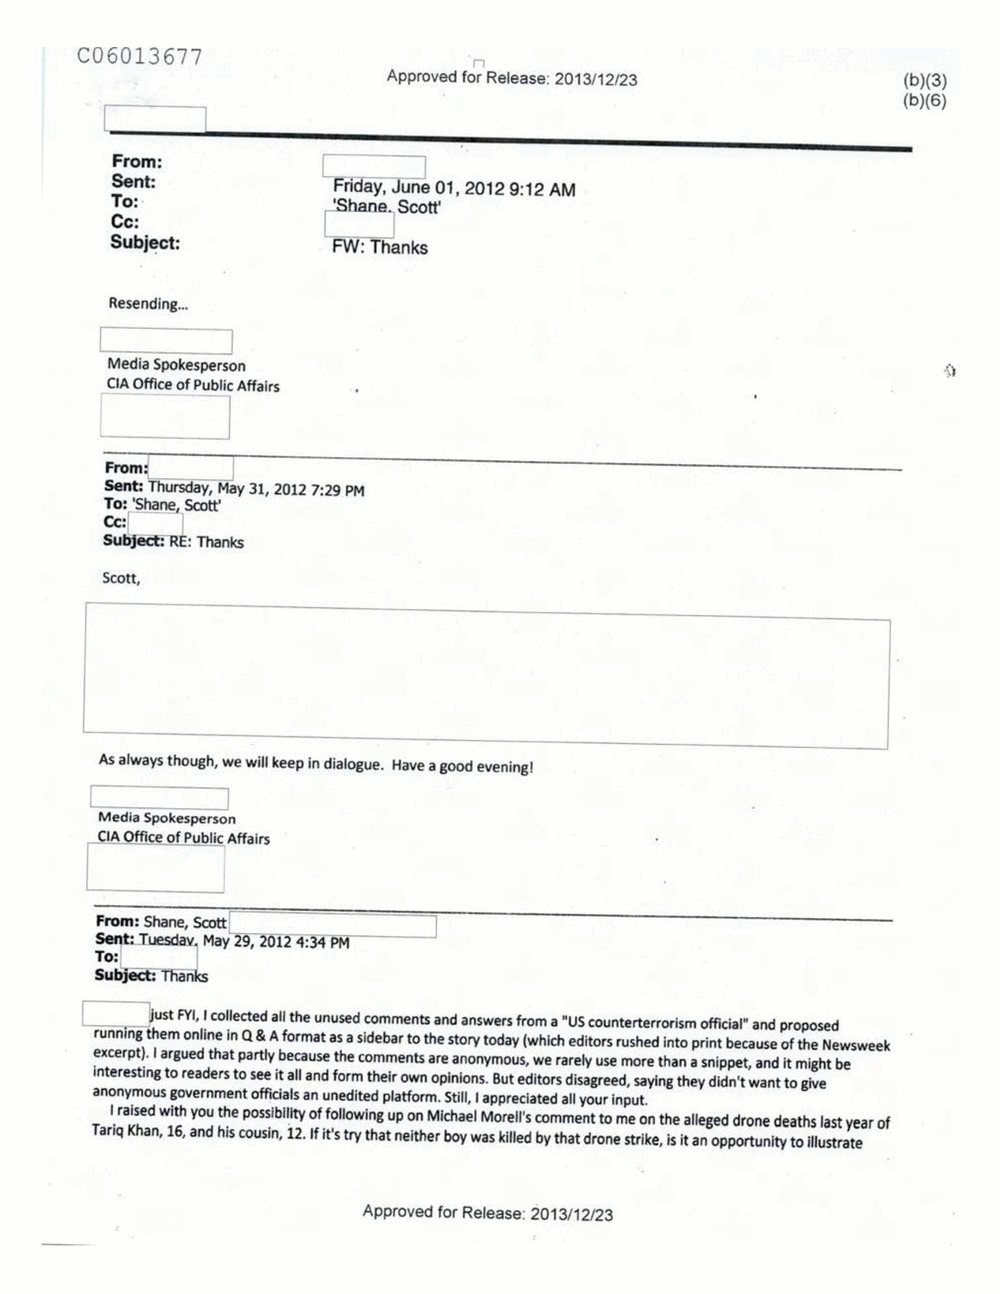 Page 532 from Email Correspondence Between Reporters and CIA Flacks